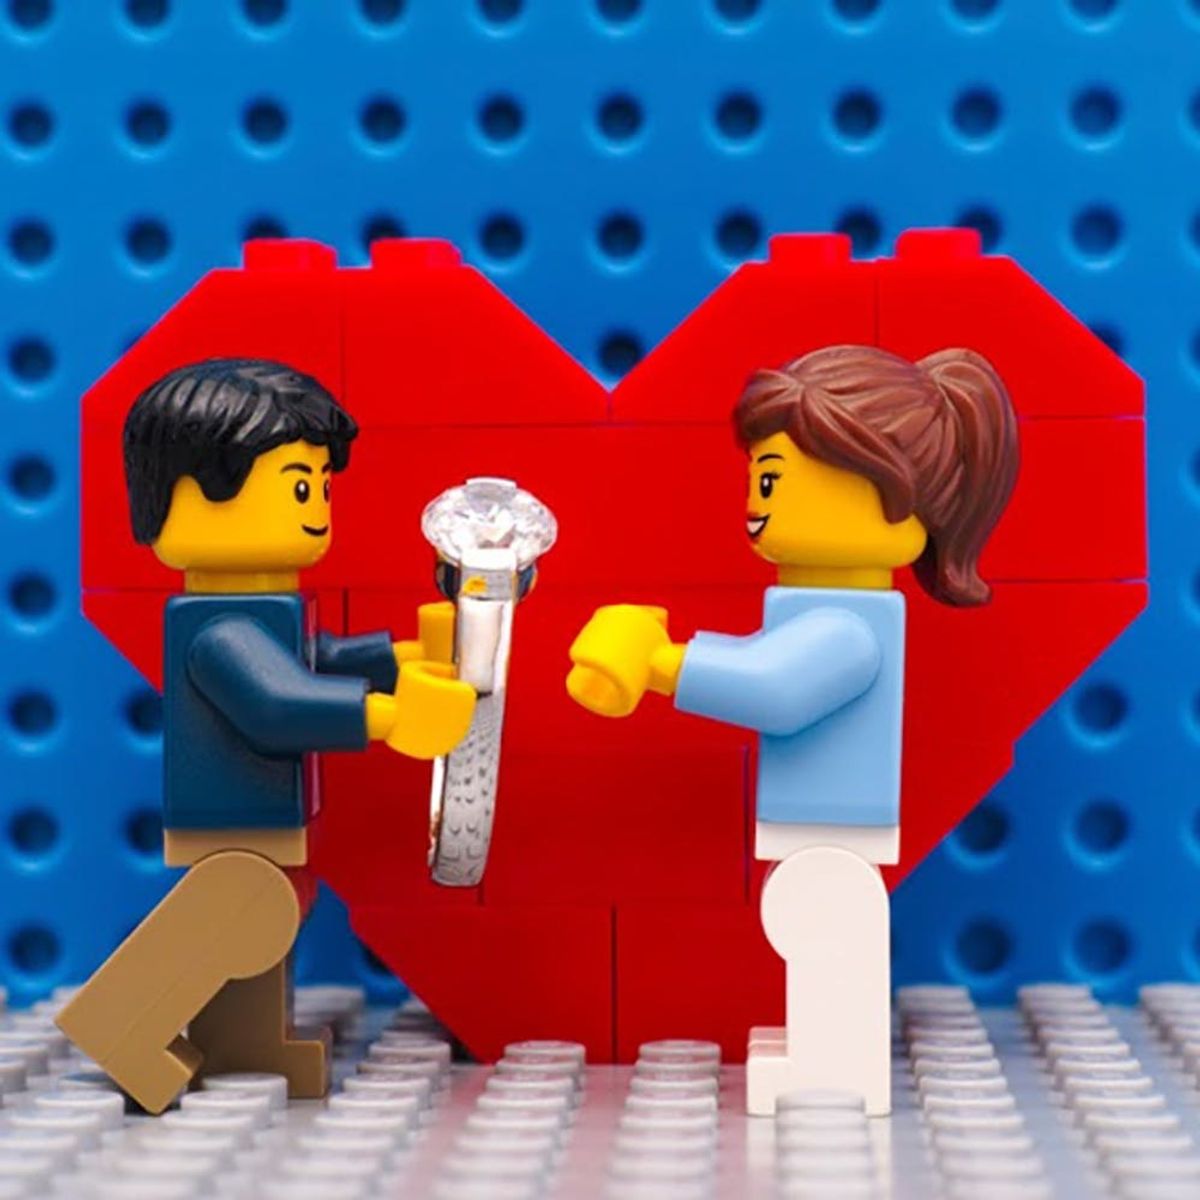 This Couple’s Lego Wedding Video Is the Most Creative Thing You’ll See Today